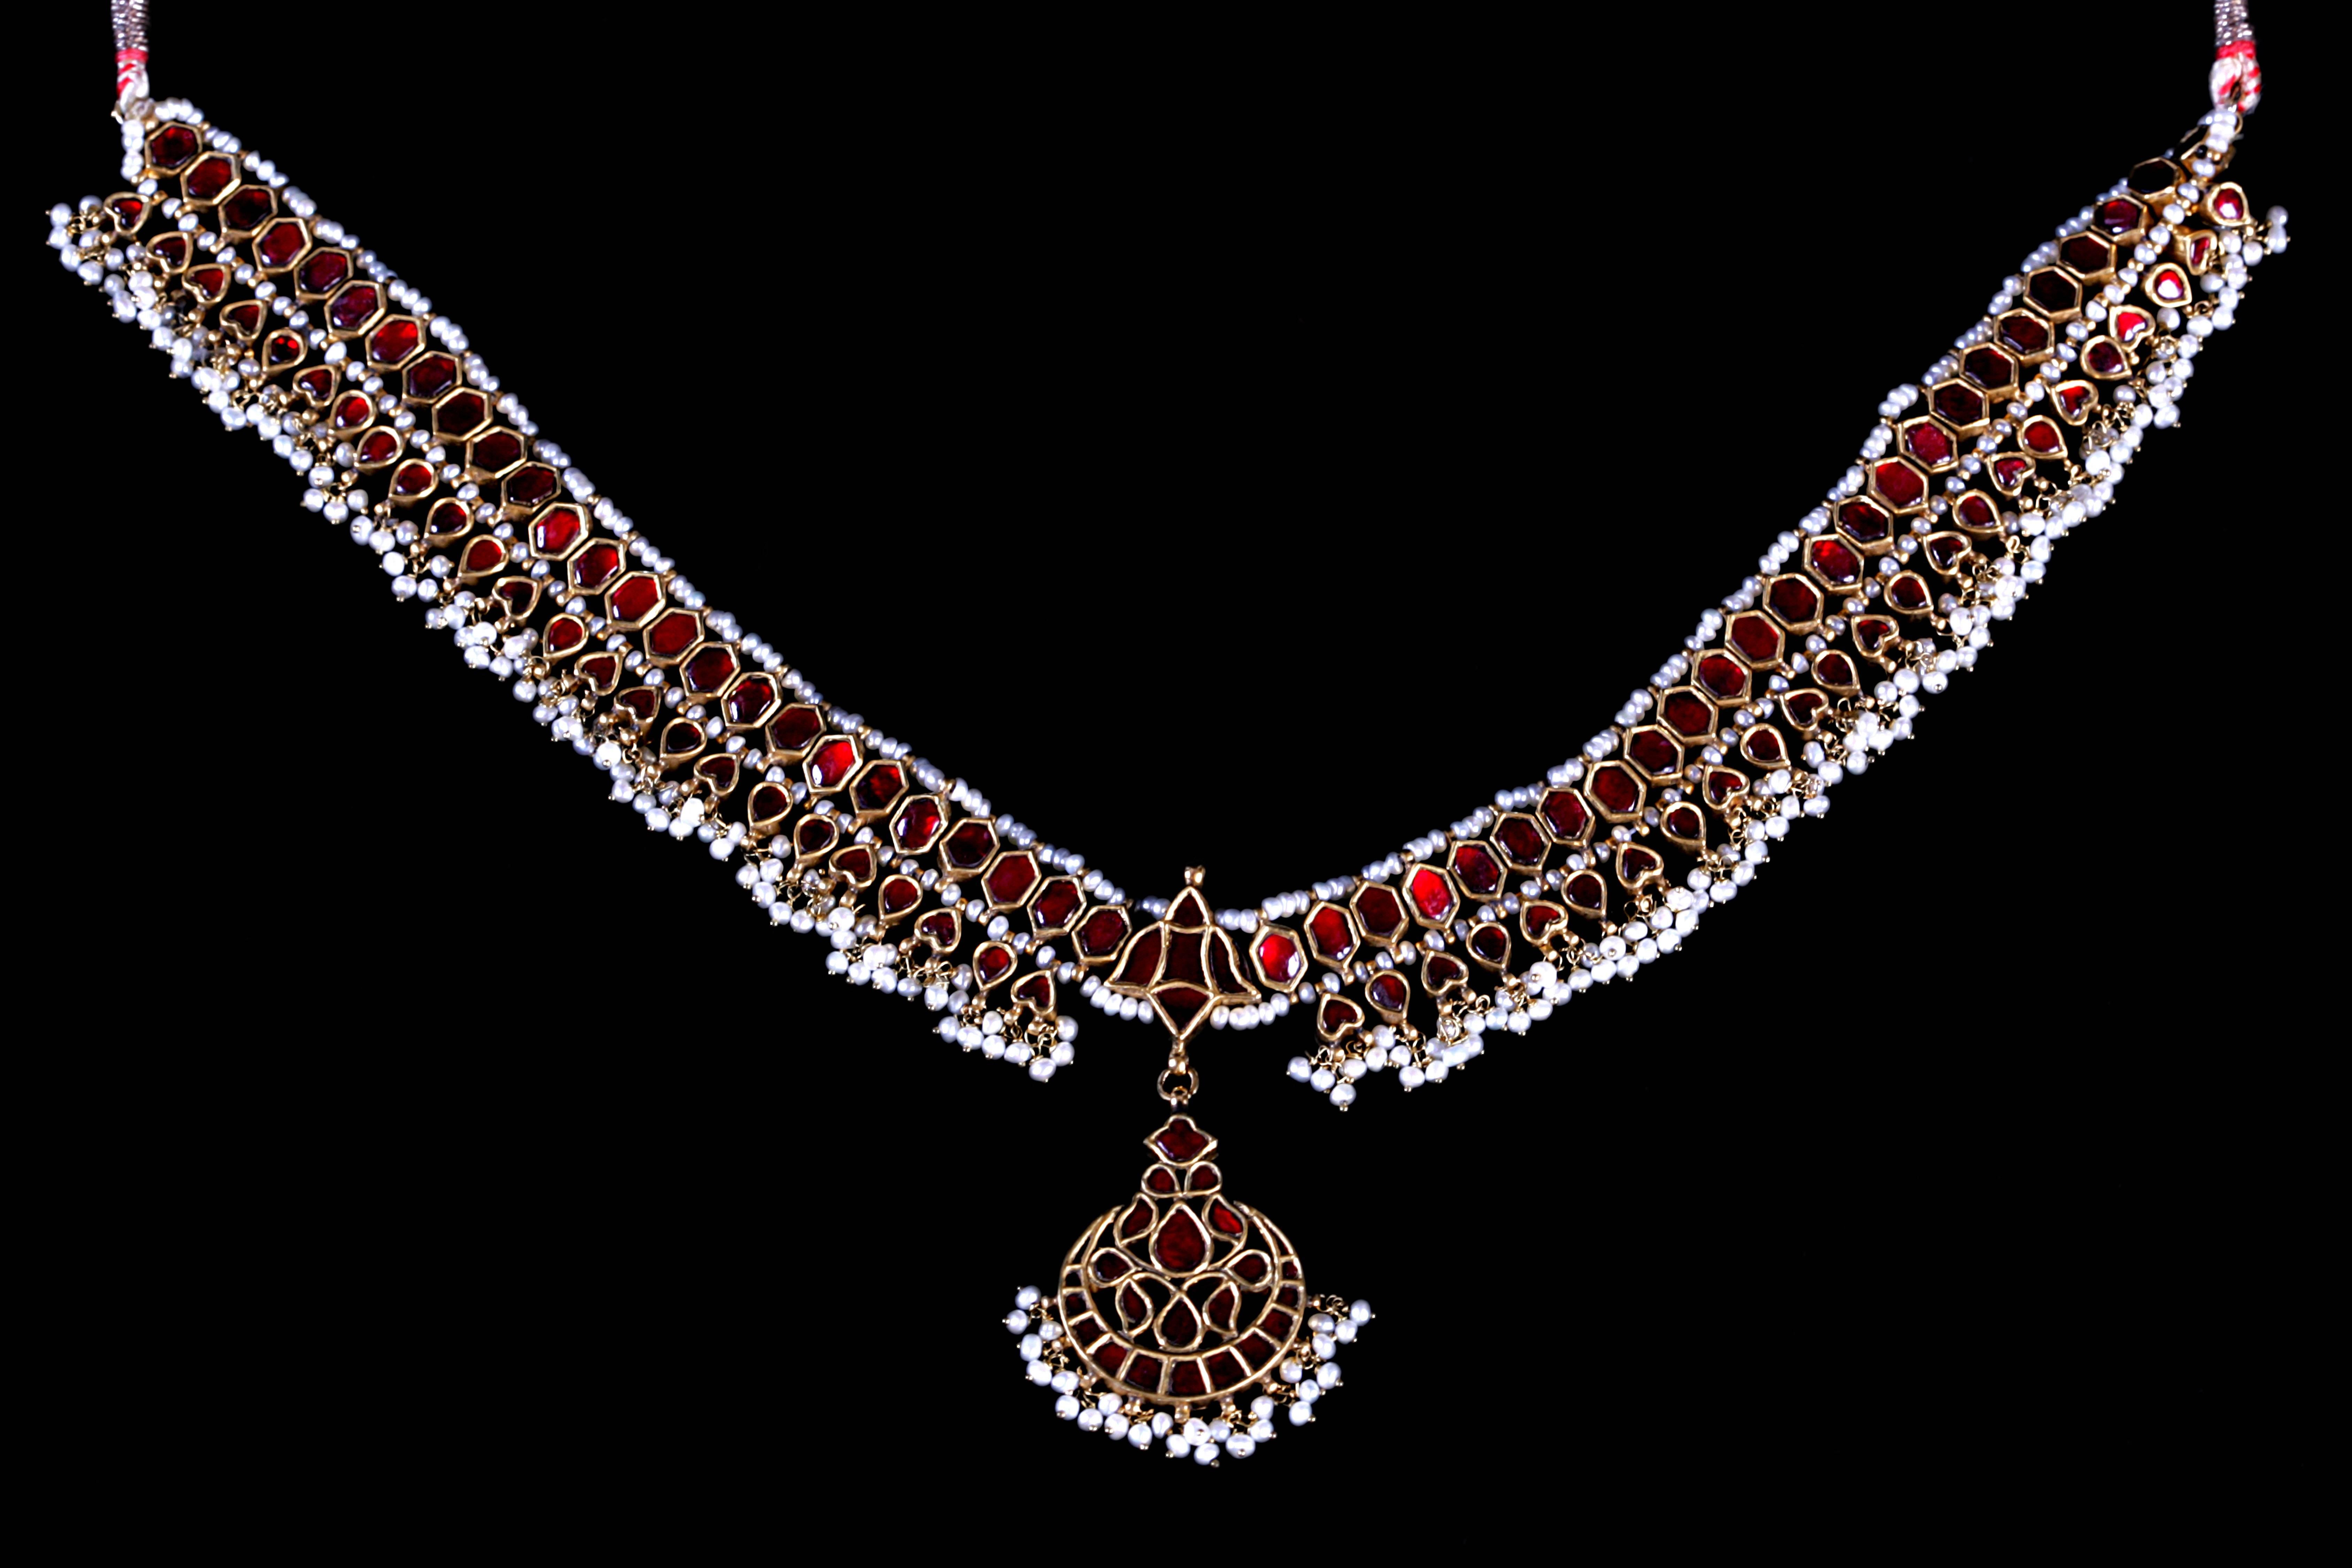 Old gold Princess necklace with rubies in one side and diamonds on the back, with hanging Basra Pearls and a Crescent Moon medallion in the center. The red rubies are chosen to commemorate the princess love to her husband, hidden from everybody's